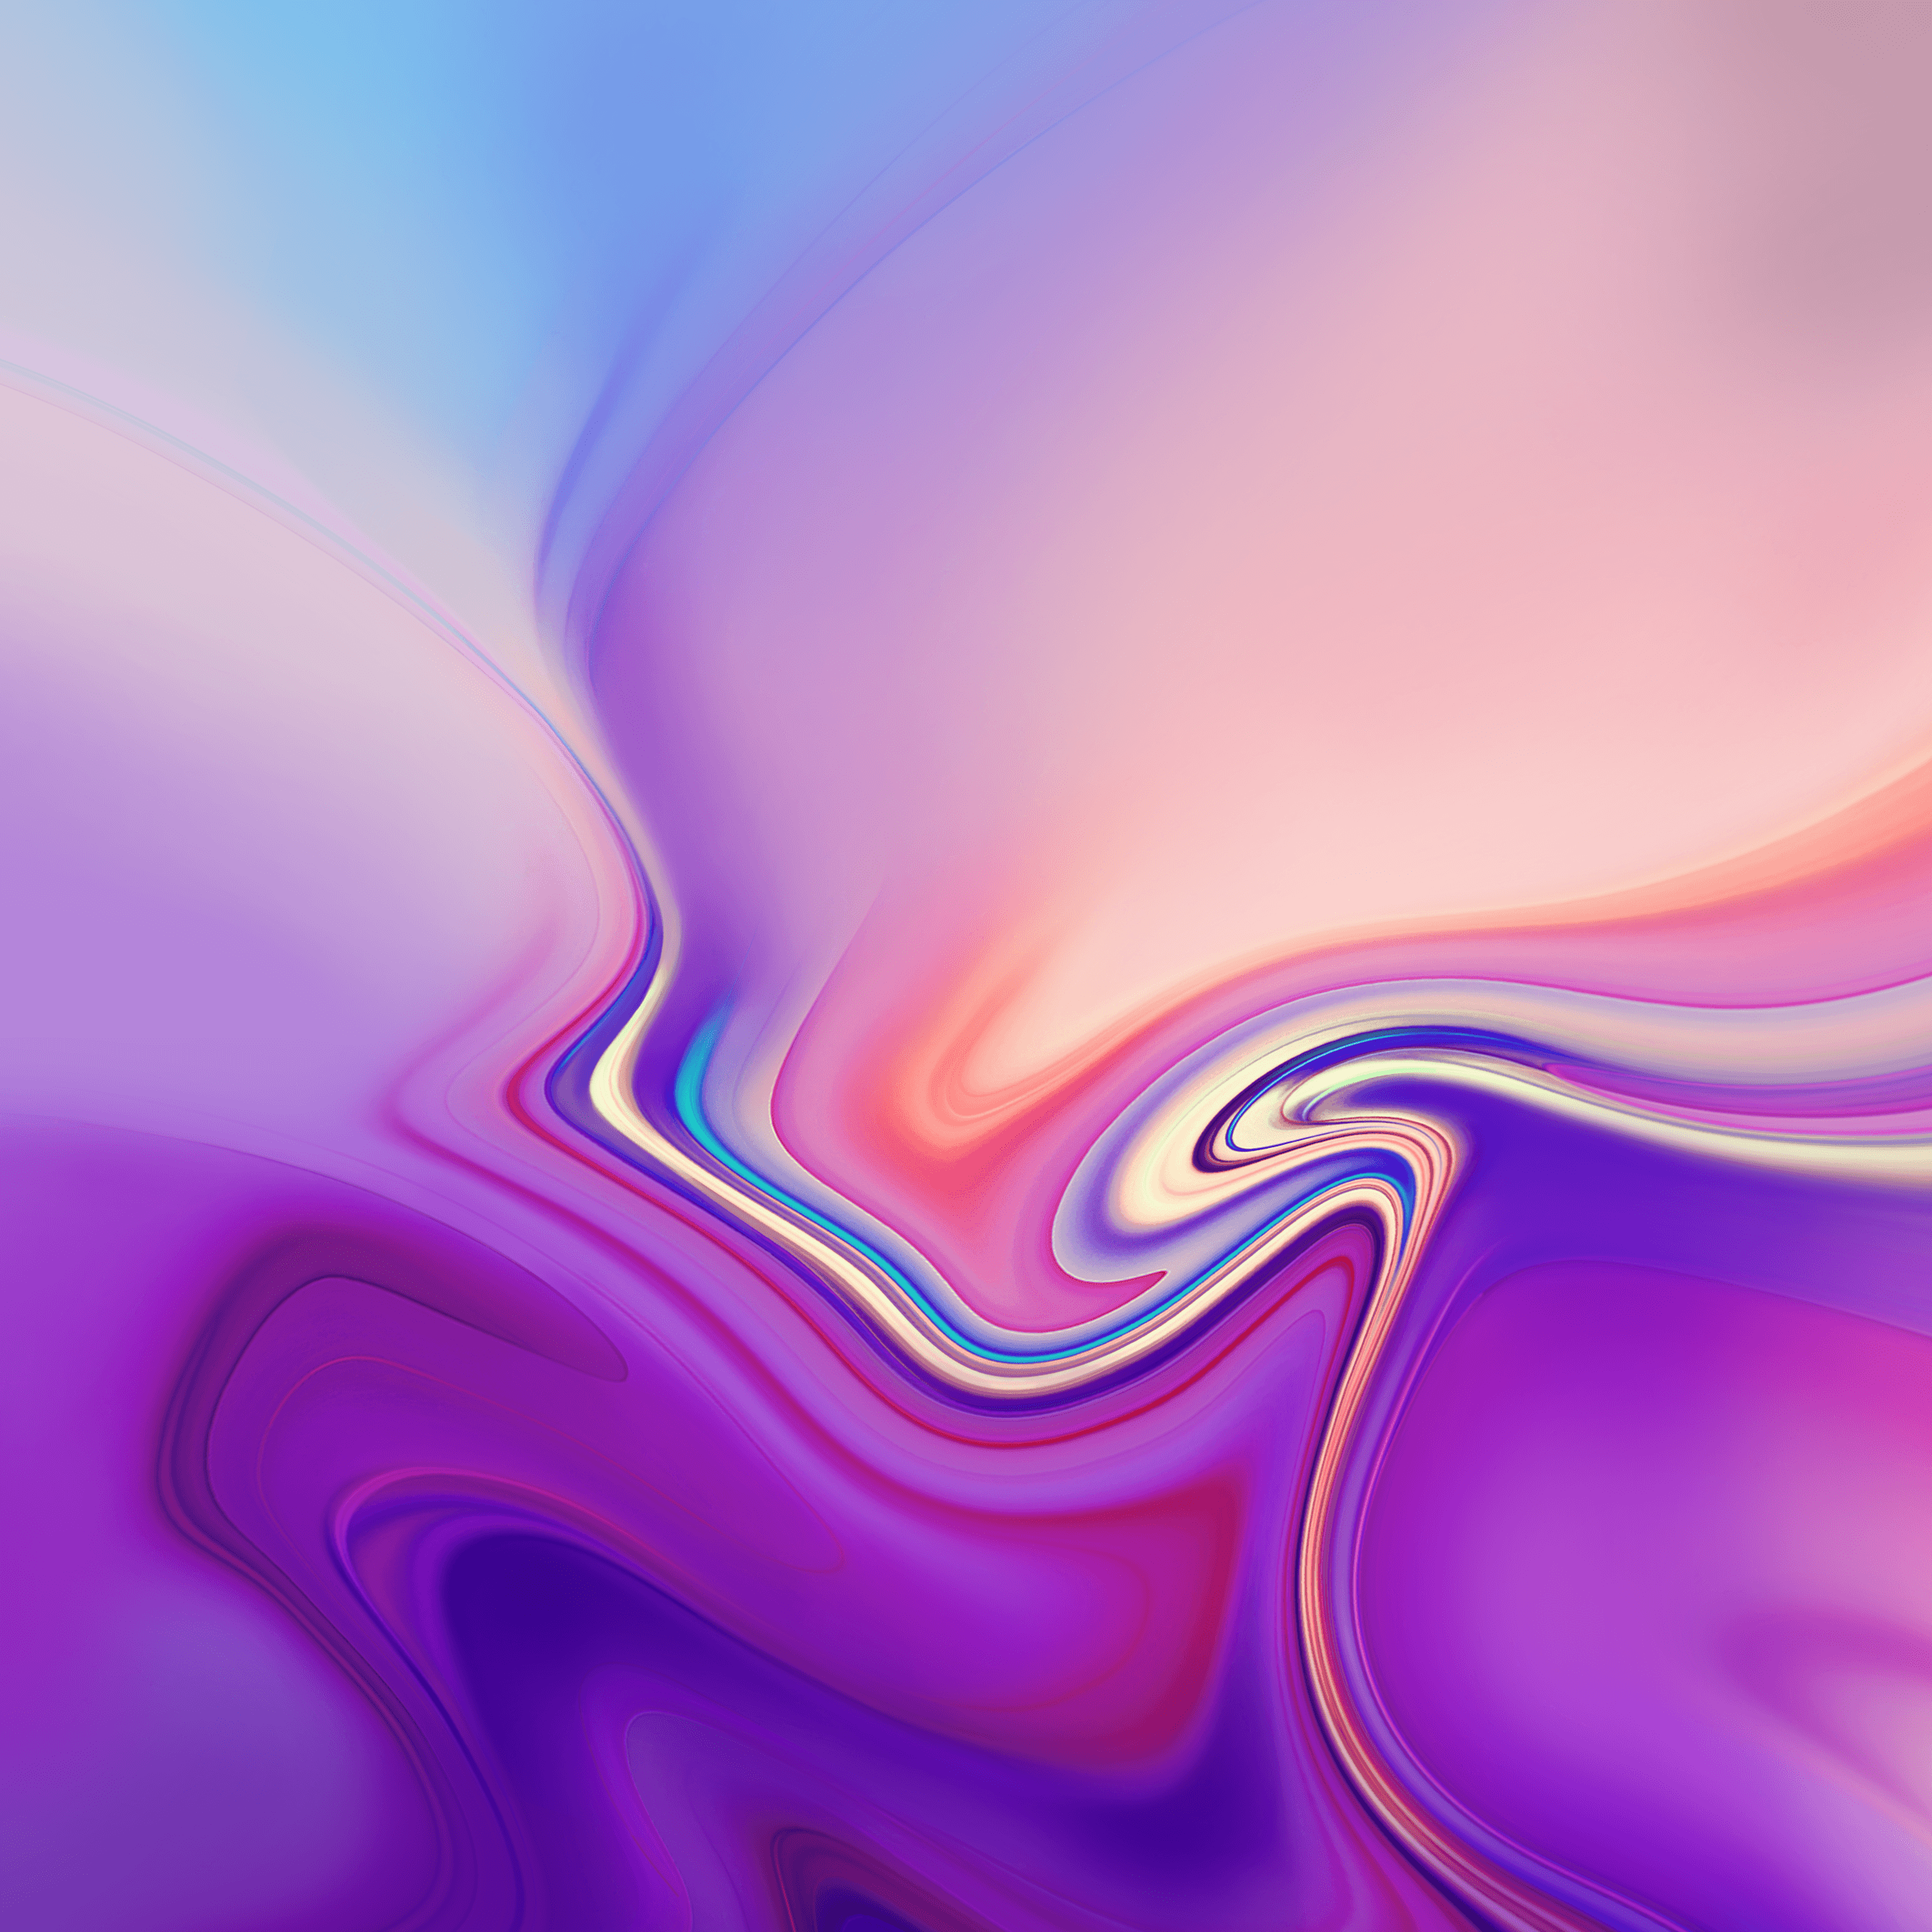 Galaxy Tab S4 wallpapers are here for your viewing pleasure